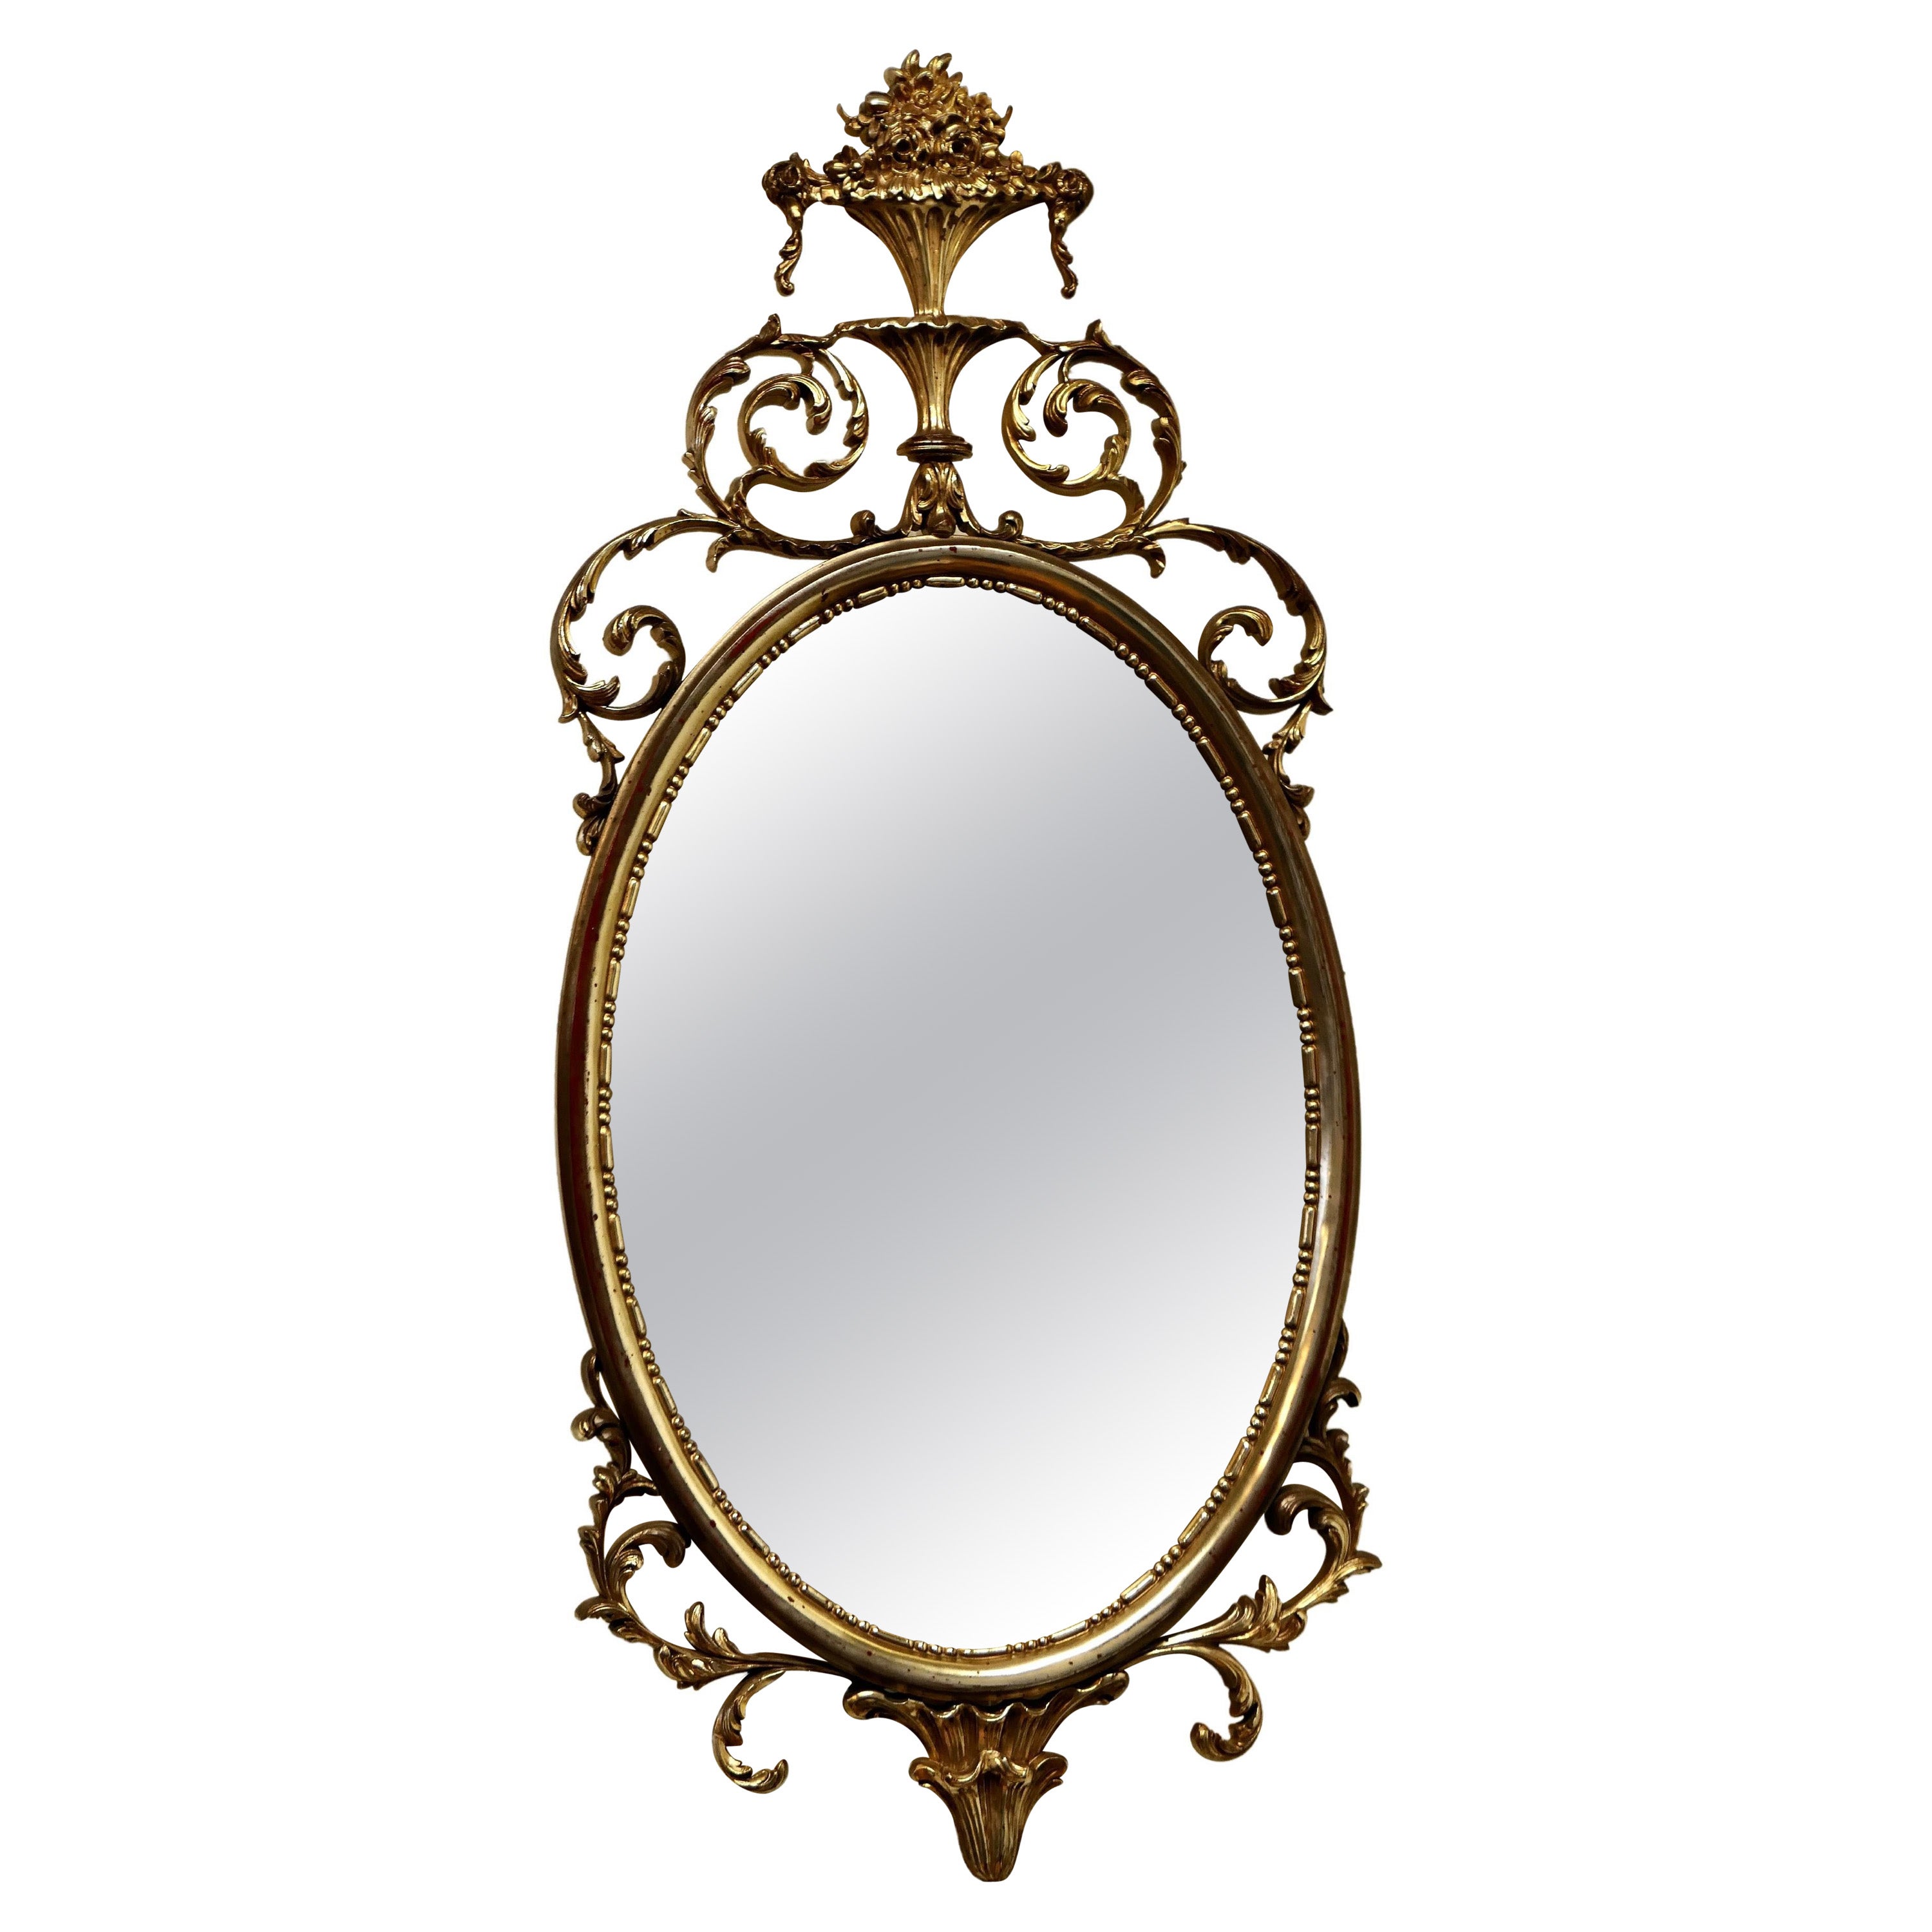 Large Gold Crested Rococo Style Oval Wall Mirror 